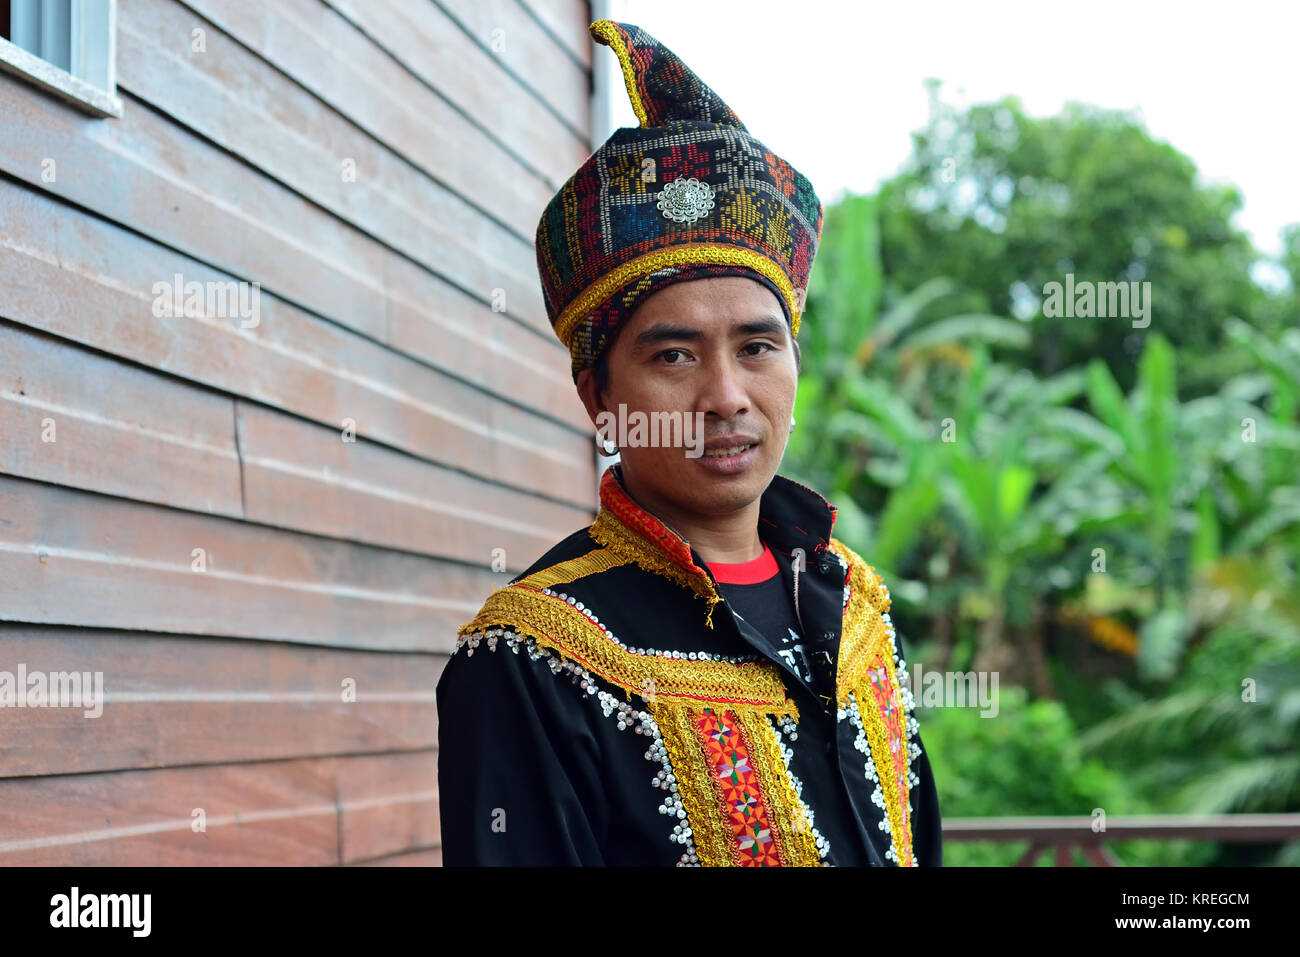 Portrait of Malaysian Native Man From Sabah Borneo in Traditional Costume. Stock Photo